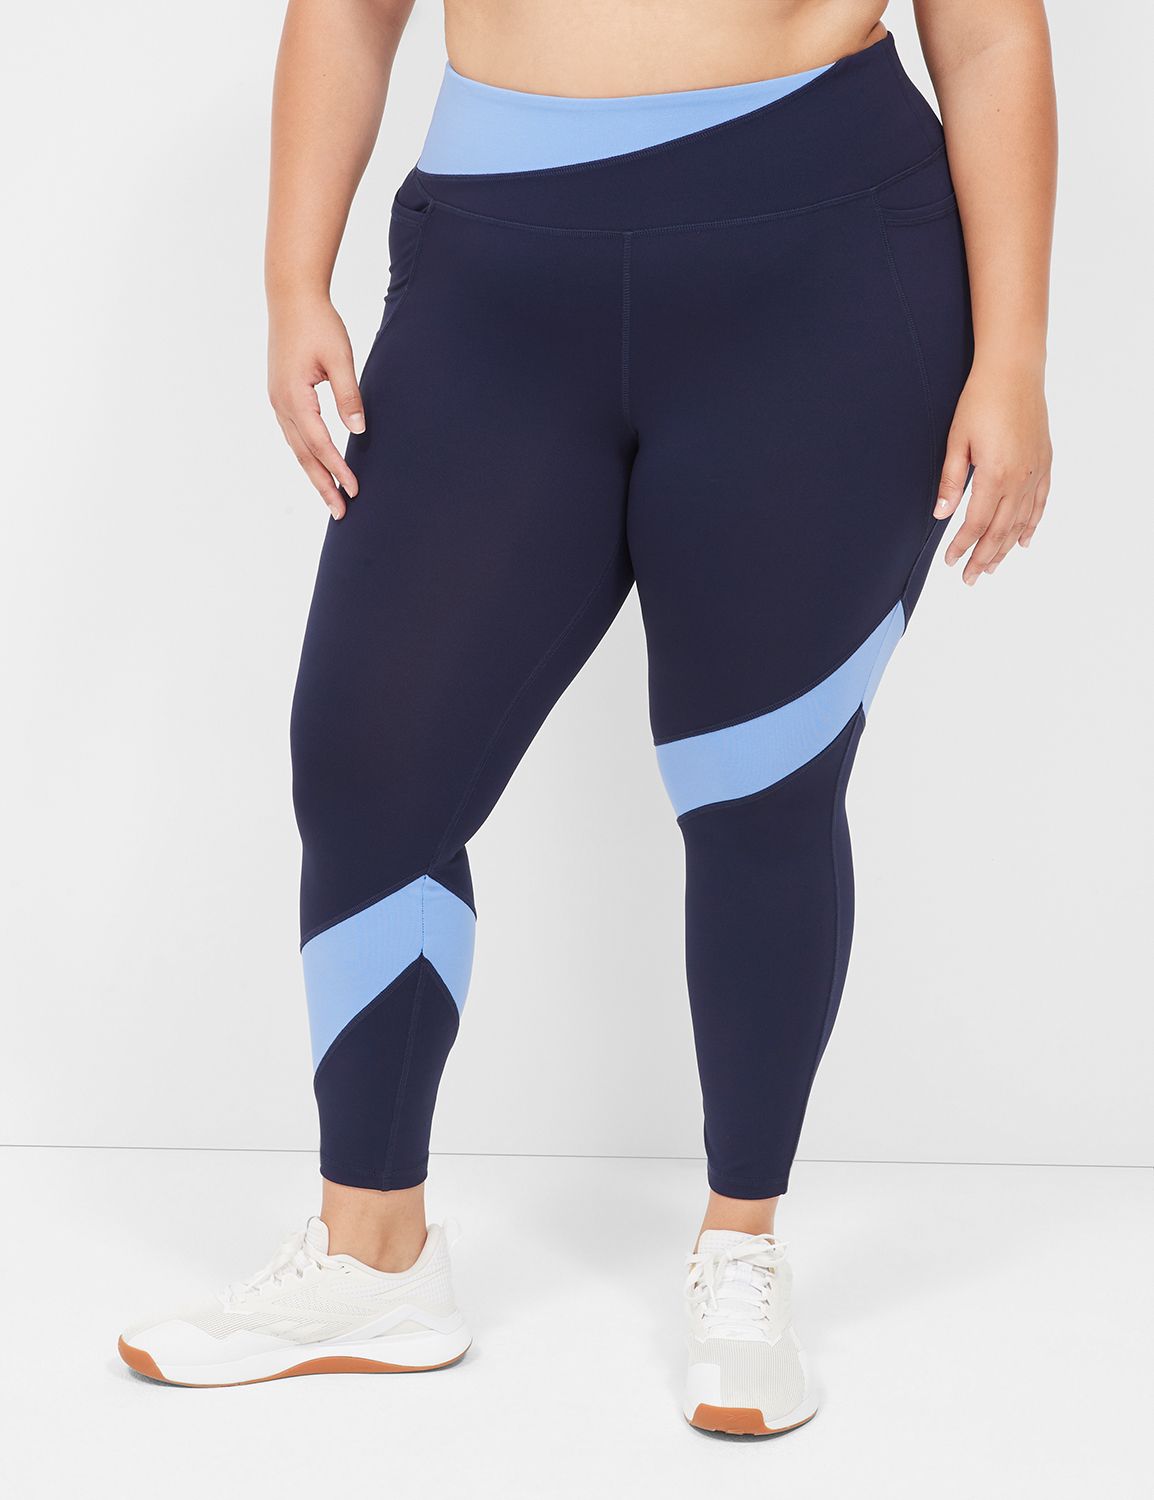 LIVI High-Rise Signature Stretch Legging With Smoothing Control Tech